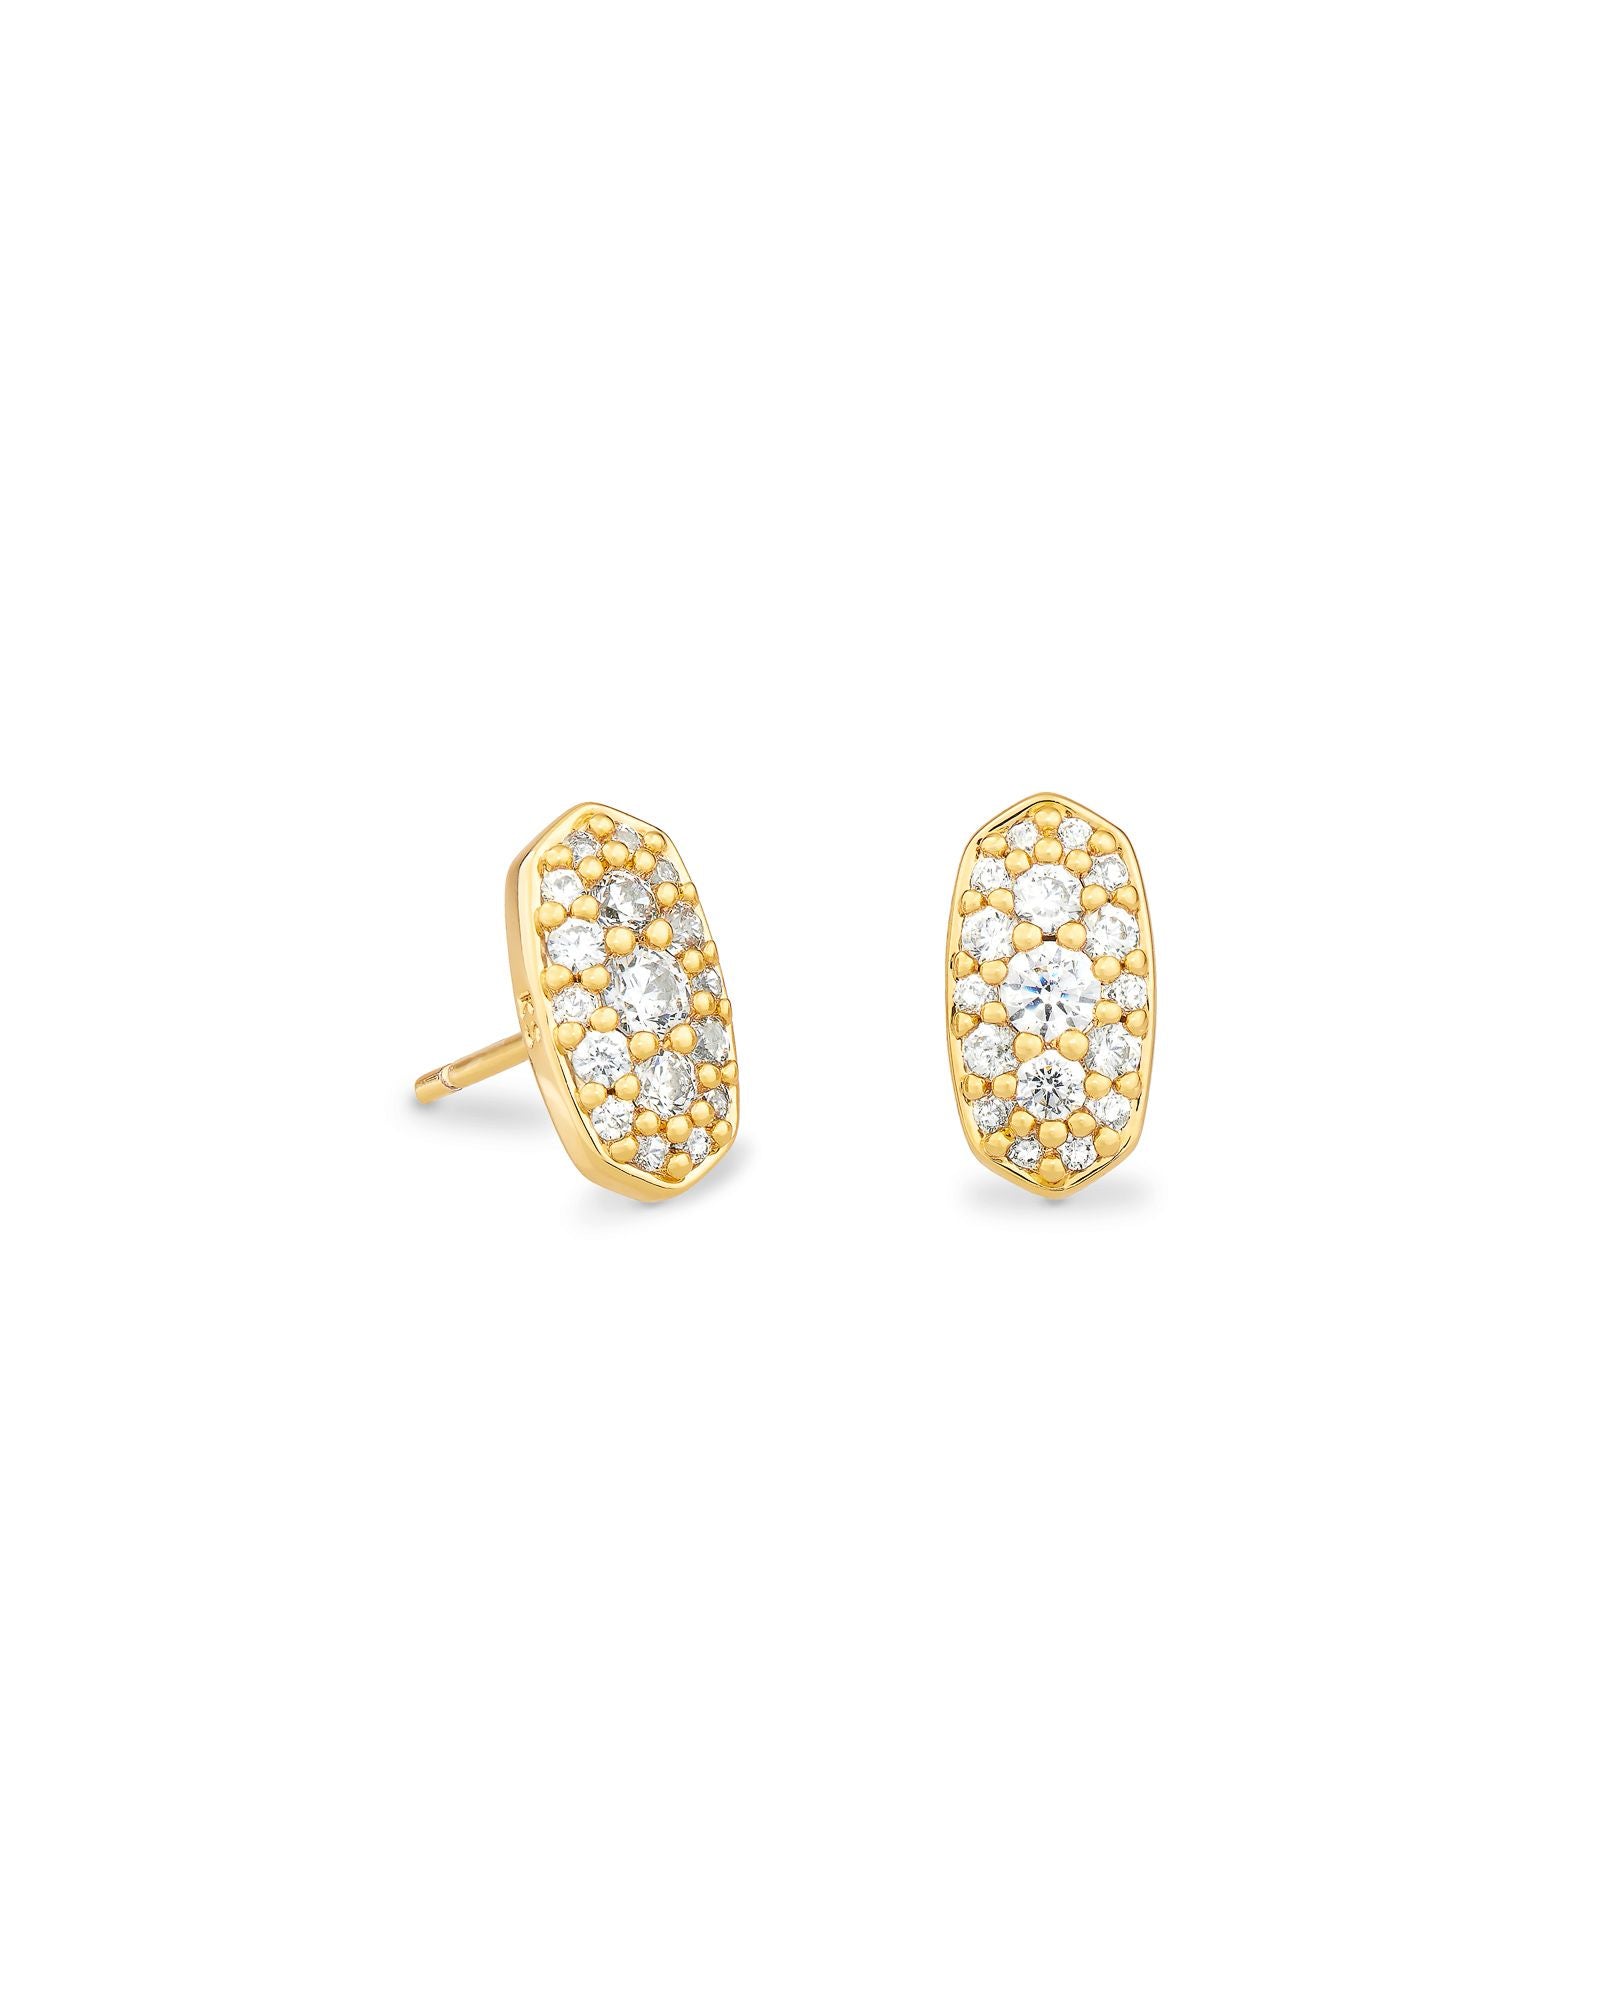 Grayson Crystal Stud Earrings Silver, Gold or Rose Gold